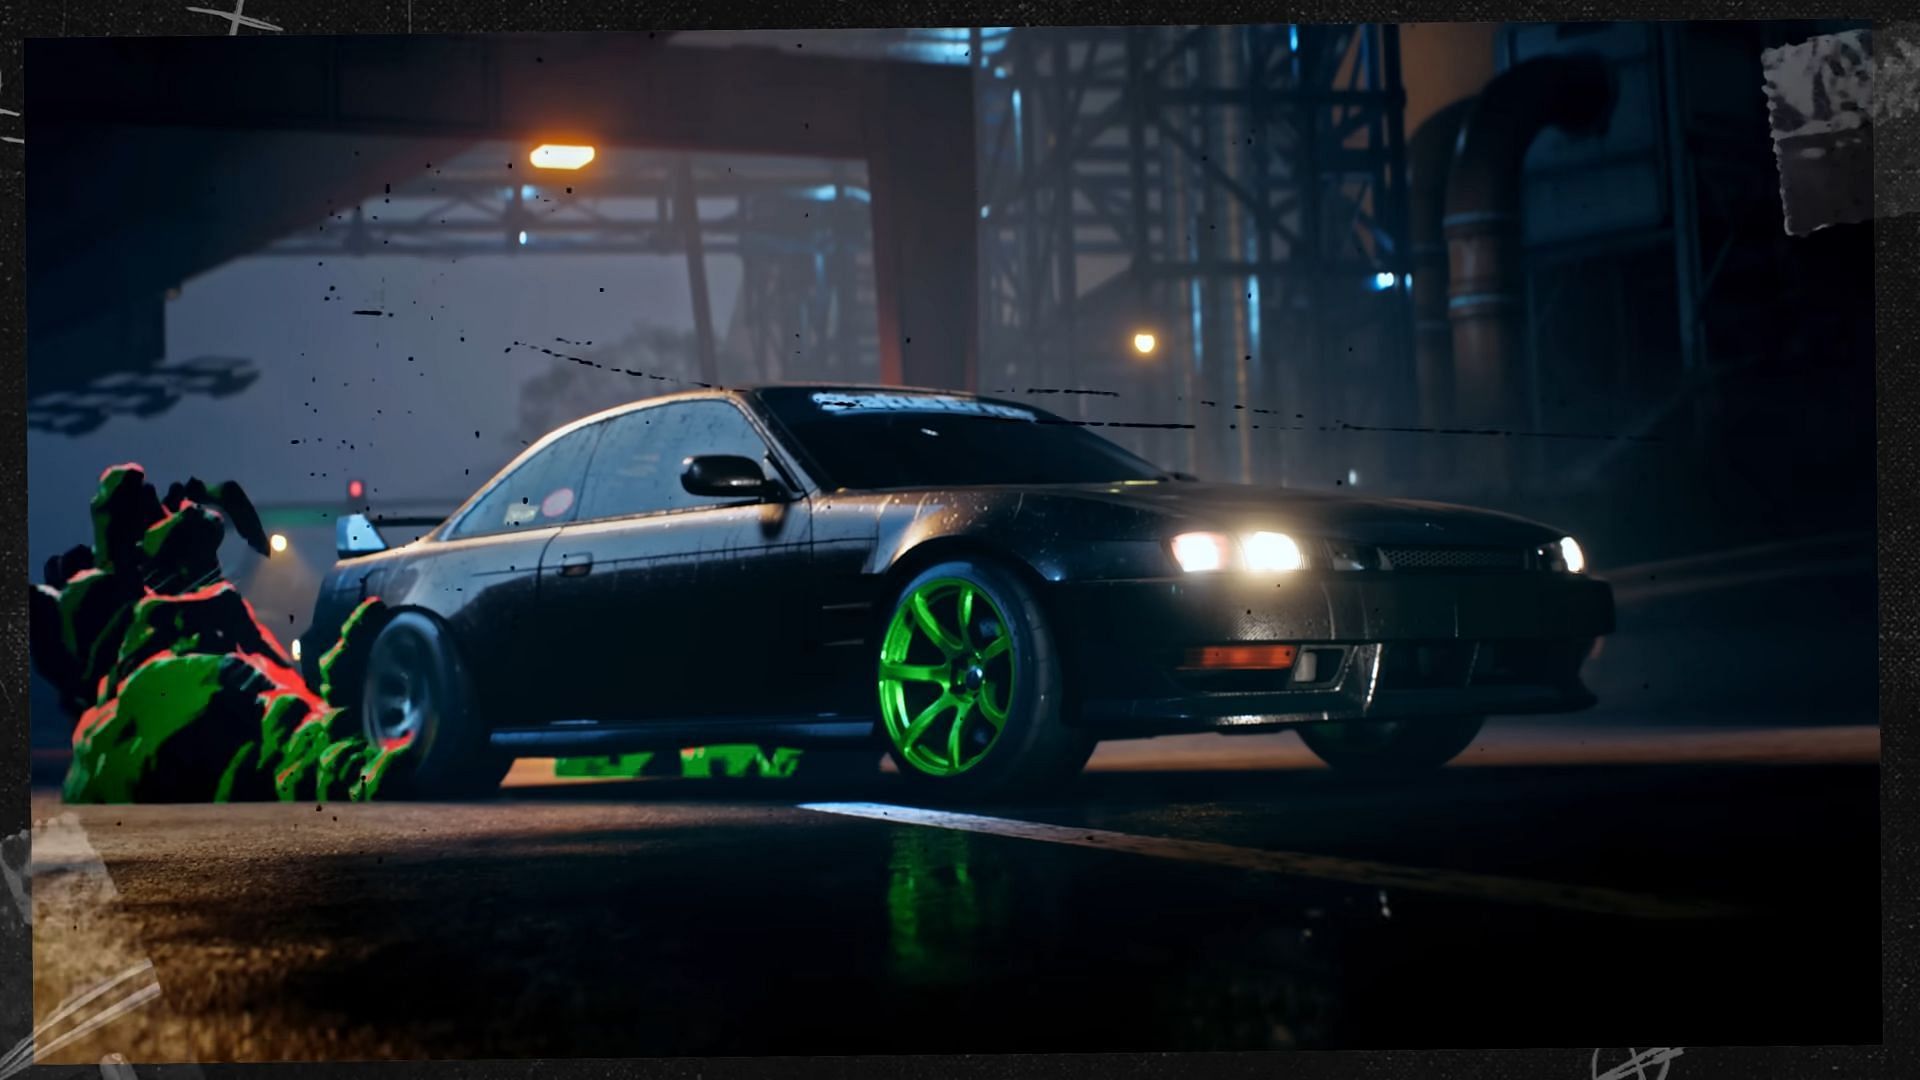 Need for Speed (NFS) 🔥 Play online